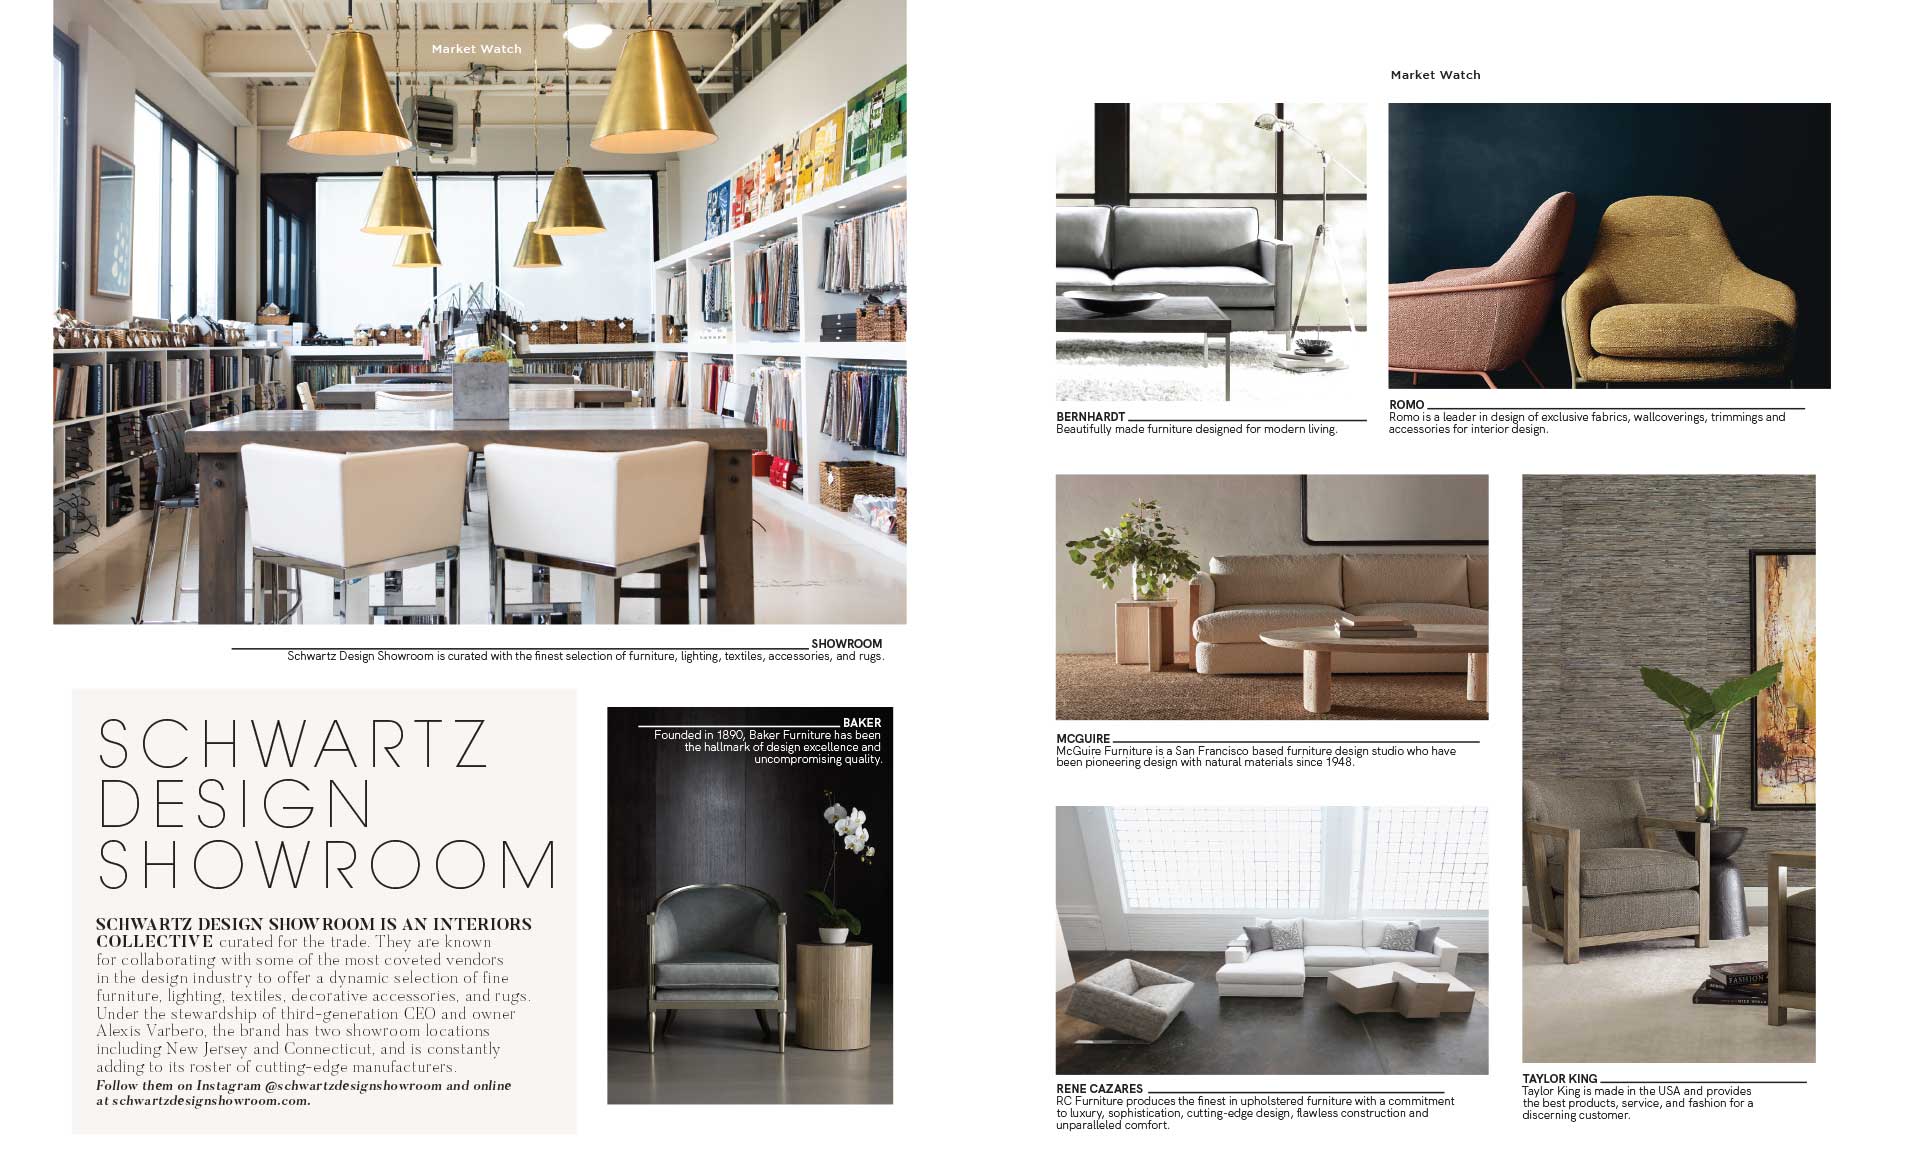 Aspire Design & Home August 2020, Article